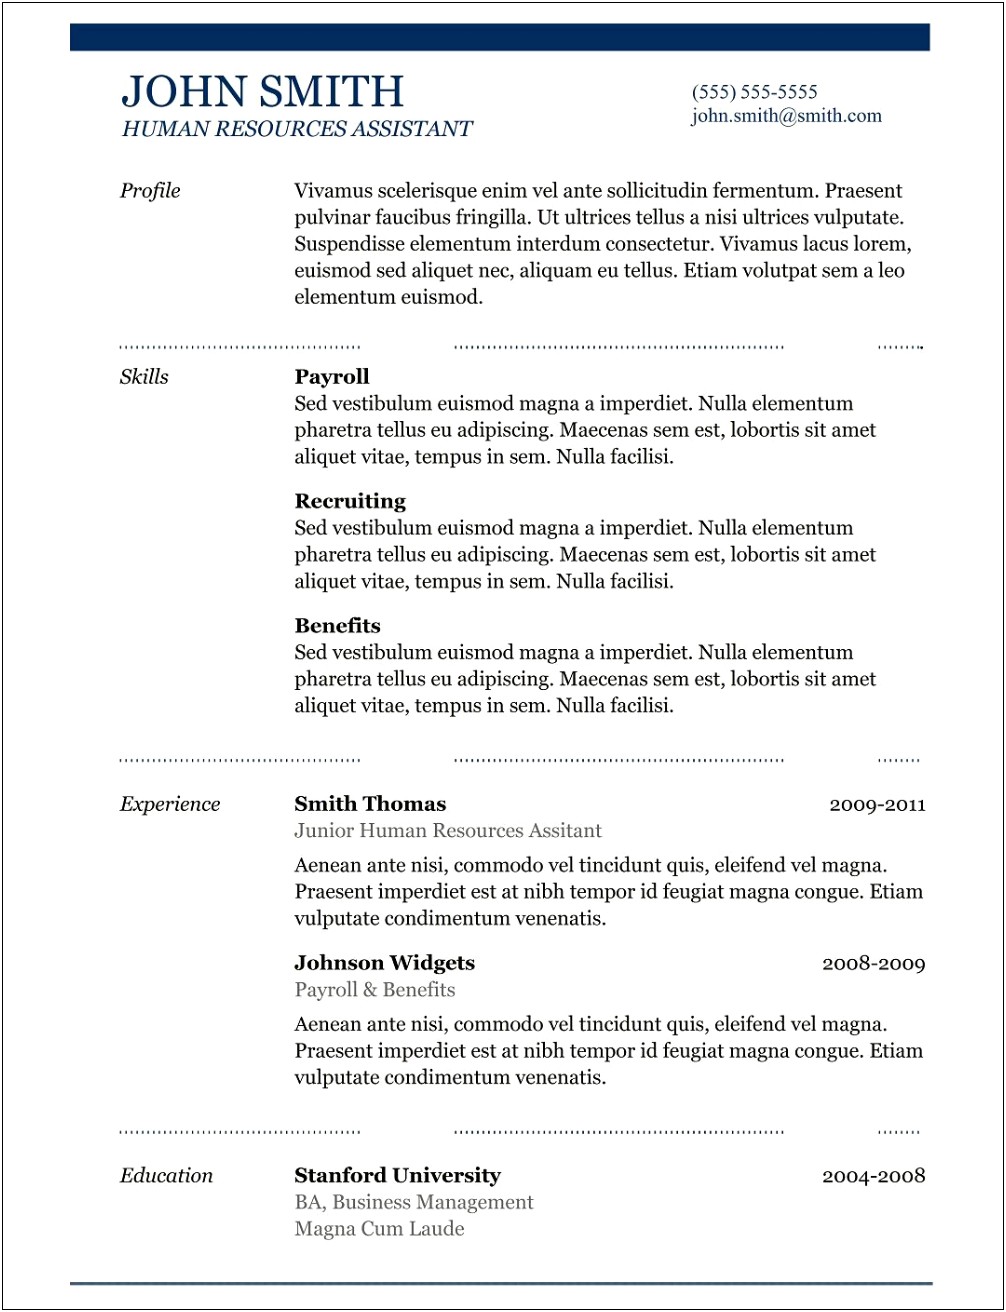 Resume Background Summary Cut And Paste